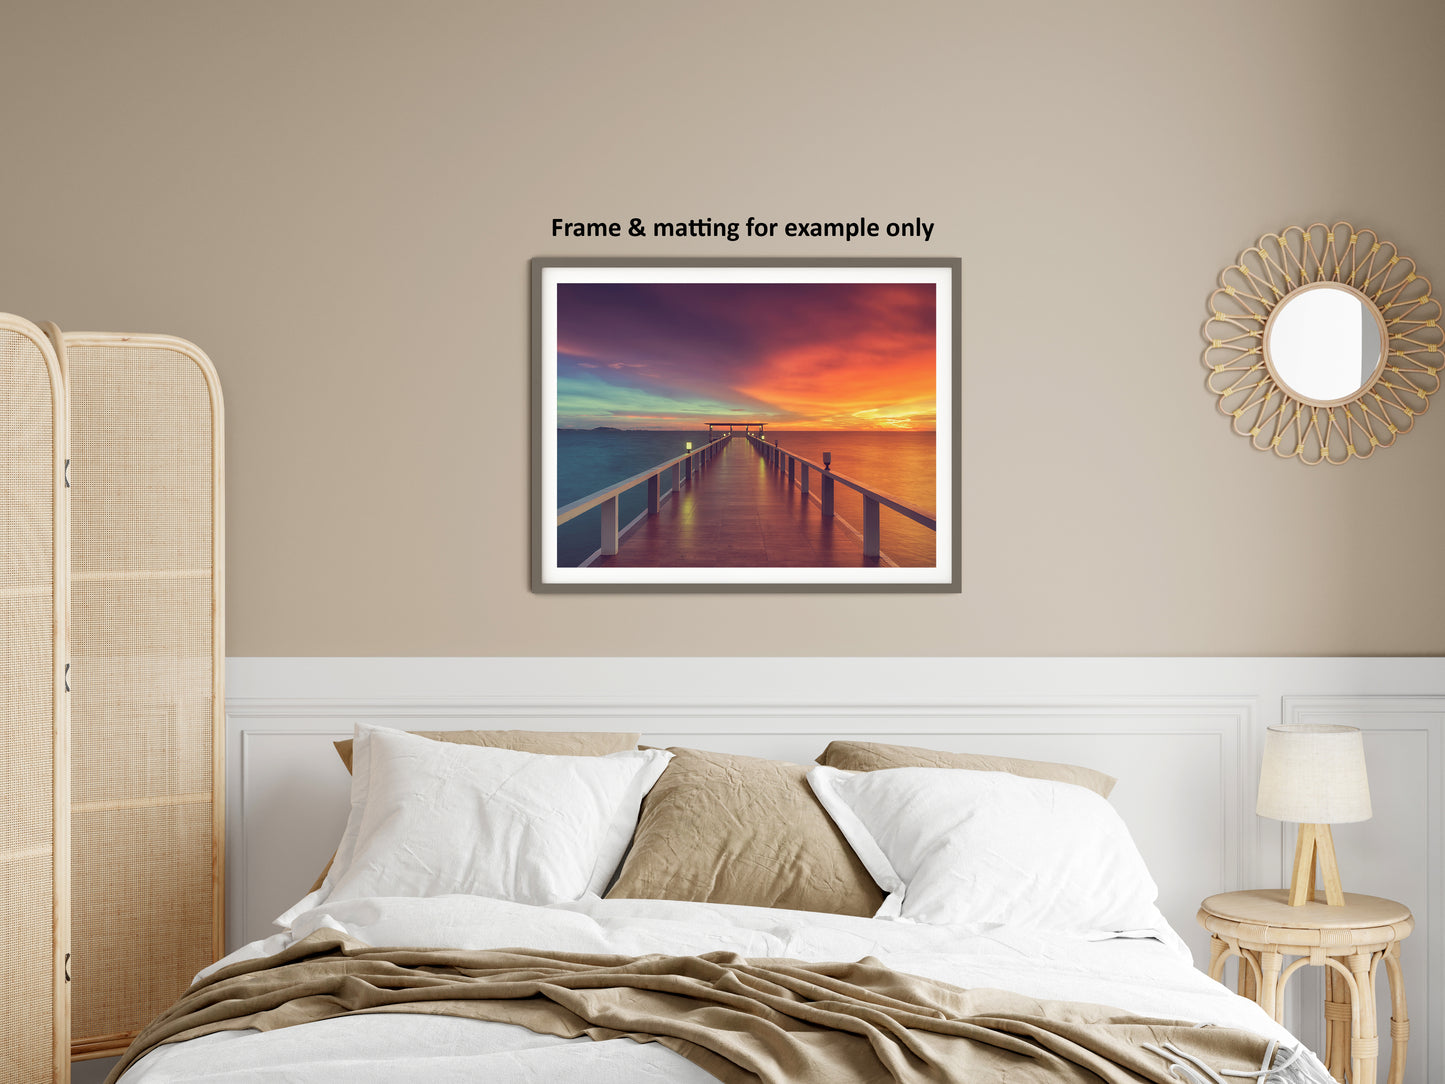 Soothing Wall Art For Bedroom: Surreal Wooden Pier At Sunset with Intrigued Effect Landscape Photo Loose Wall Art Prints